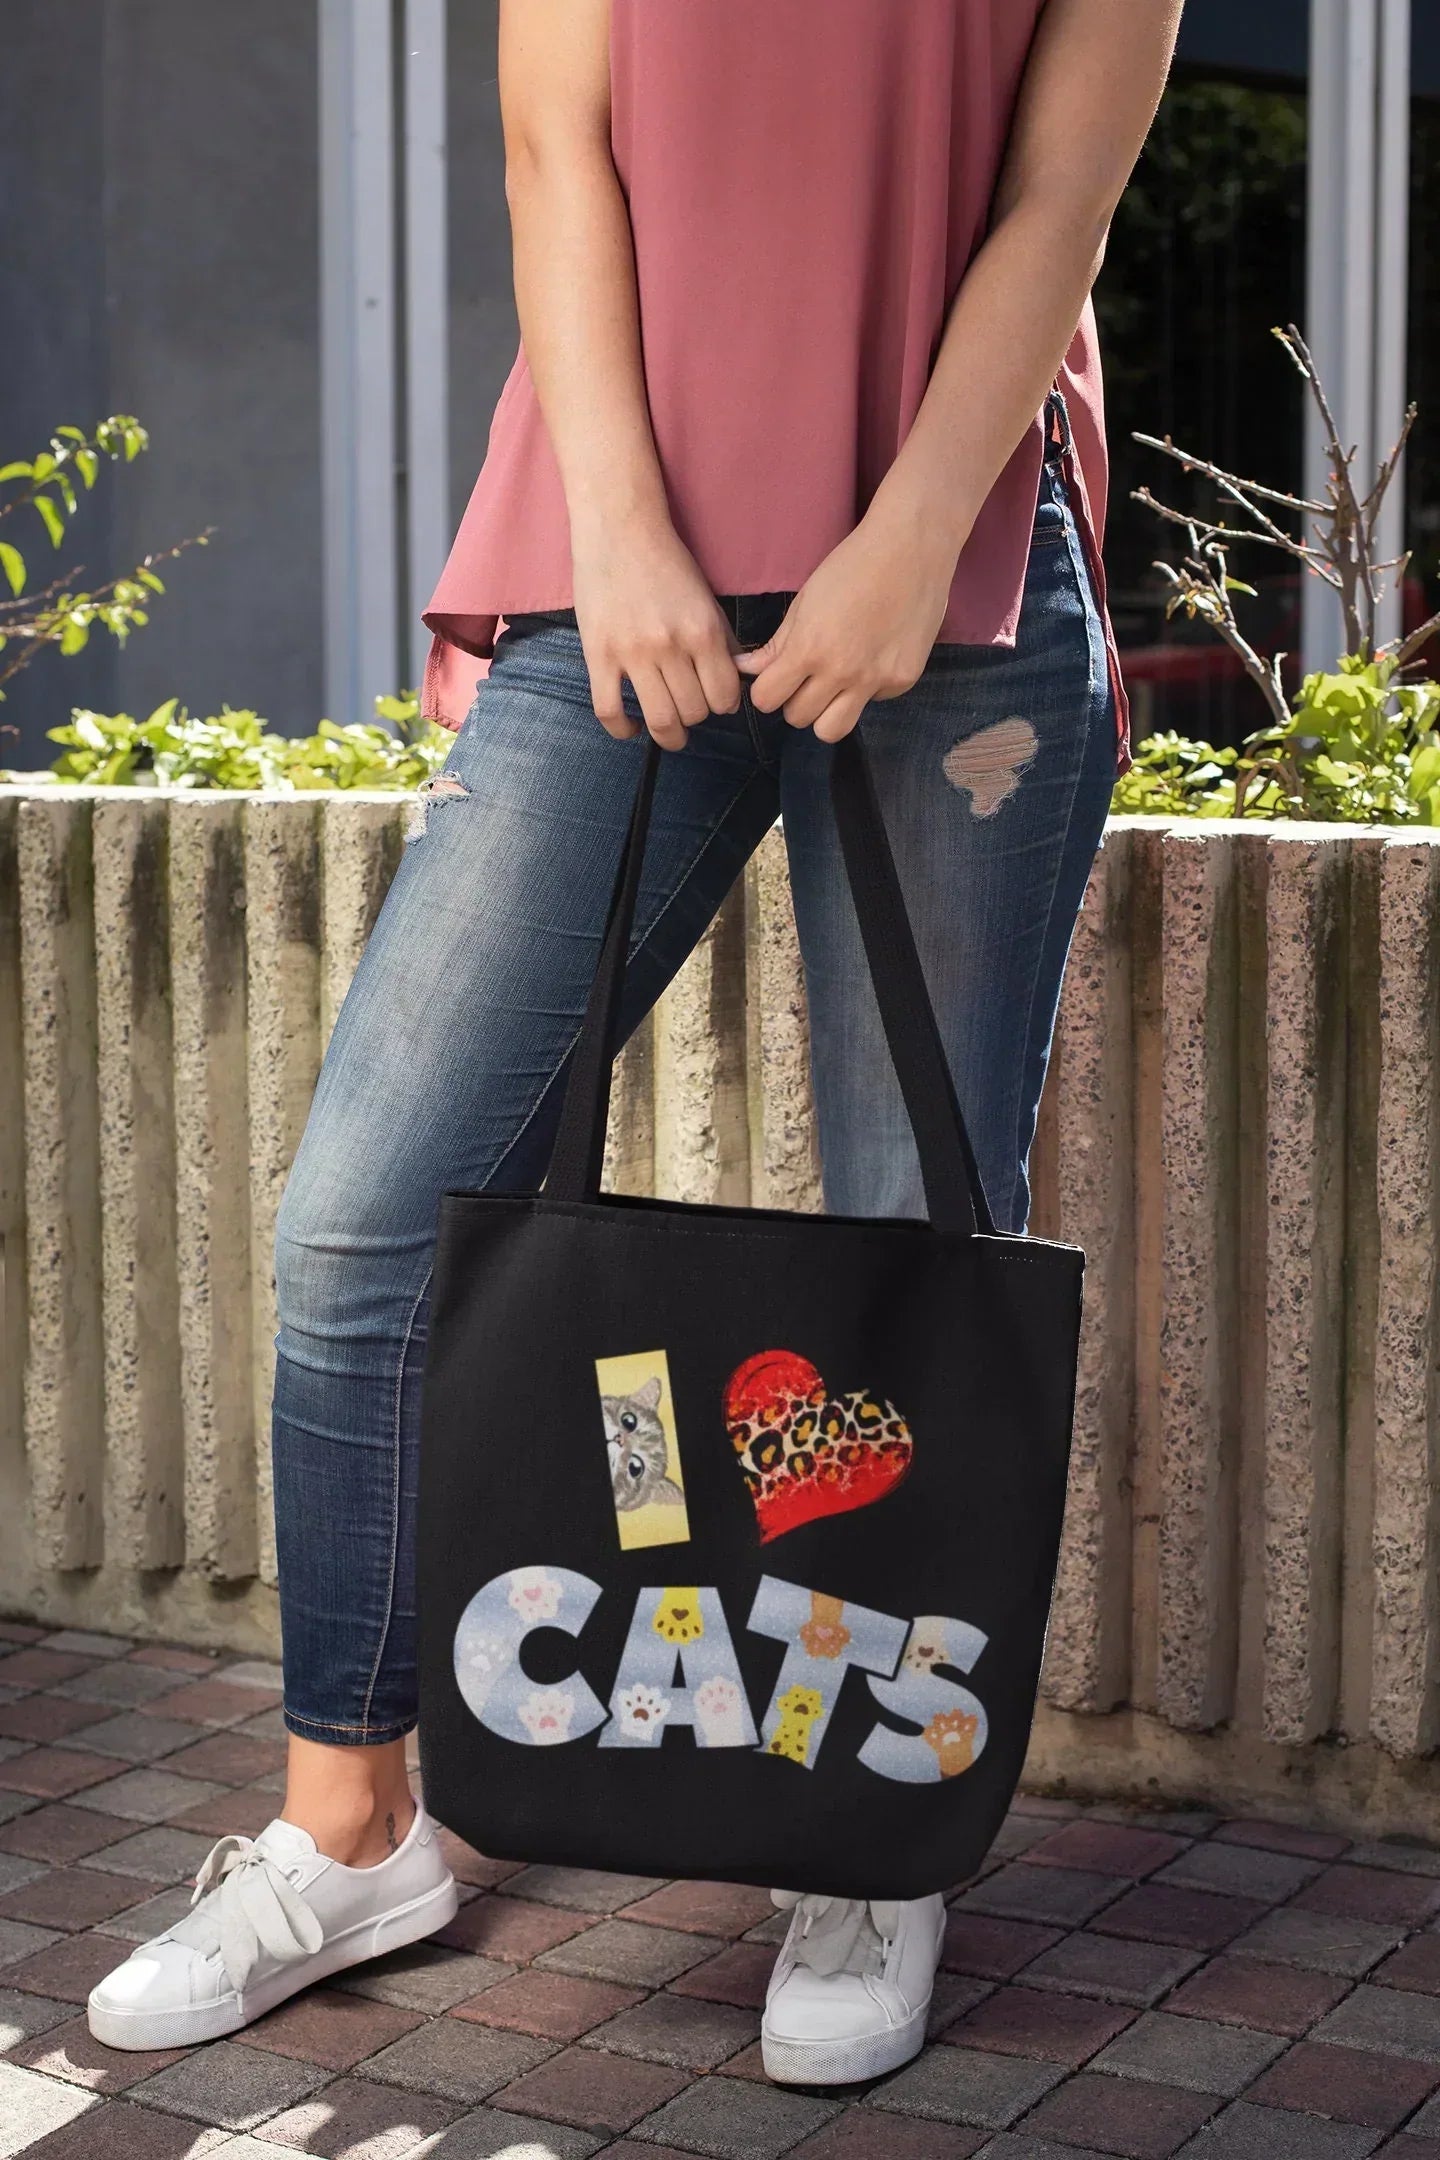 Cat Aesthetic Tote Bag with Pockets, Colorful Cat Lovers Gift, Cat Mom Canvas Bag, Nurse Tote, Funny Cat Themed Gifts for Teachers, Cat Dad HMDesignStudioUS